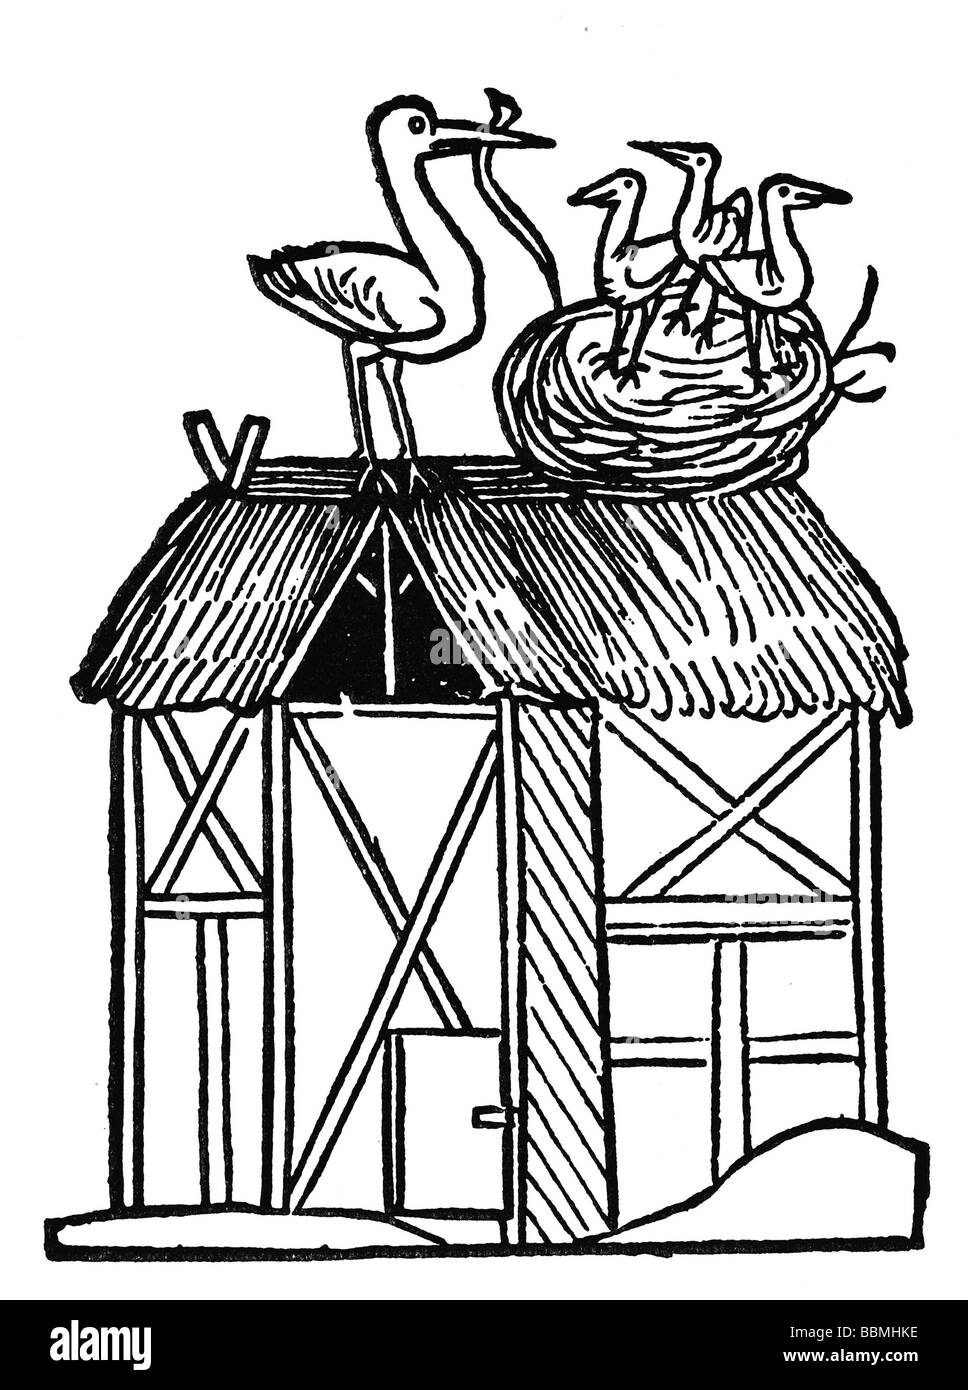 Stork is feeding his young with a snake, wood carving from medieval times Stock Photo